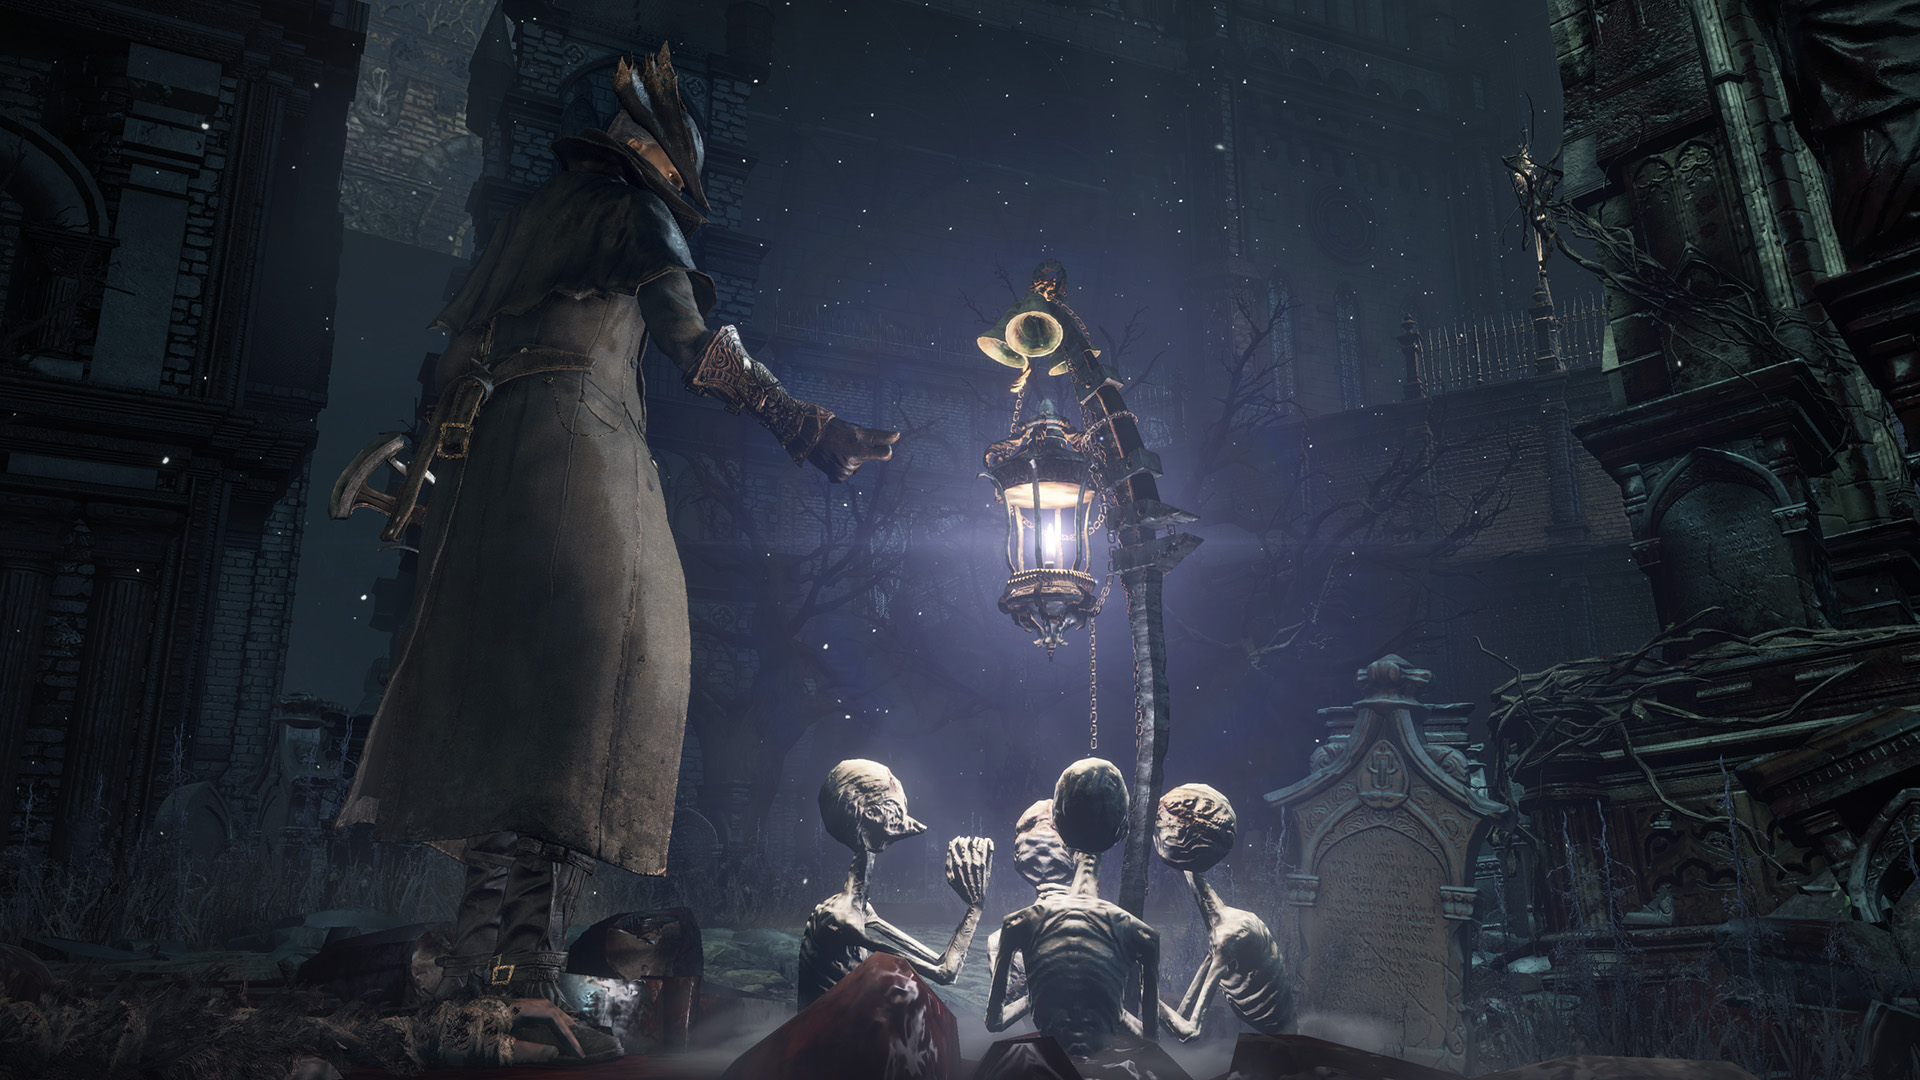 Bloodborne Used To Wreck Me, Now I’m Wrecking Bloodborne